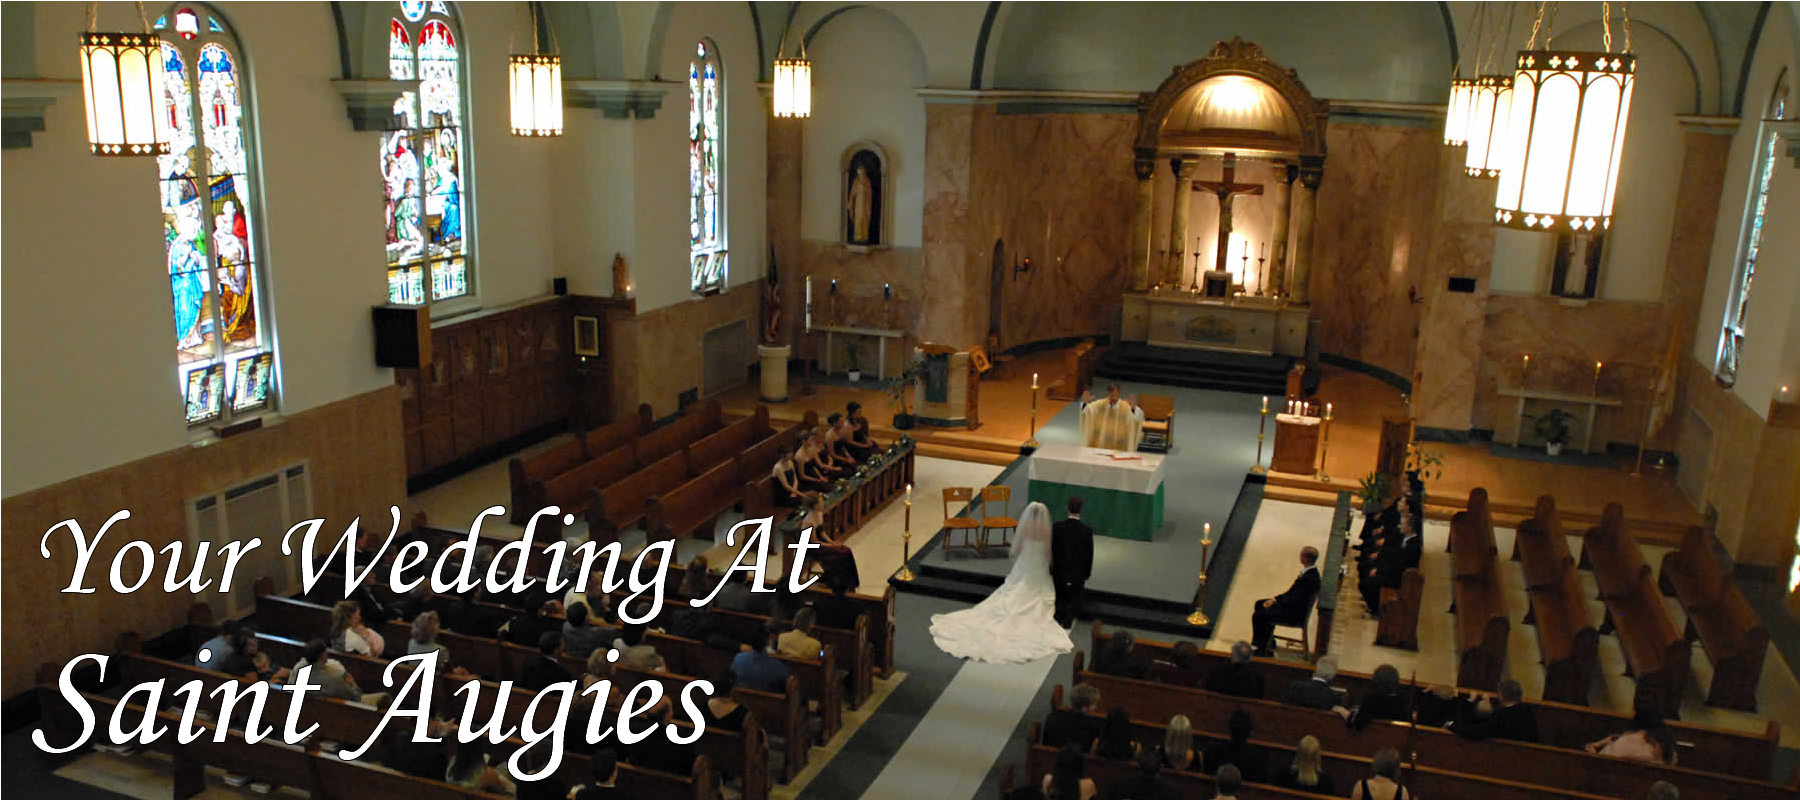 Your wedding at St. Augies